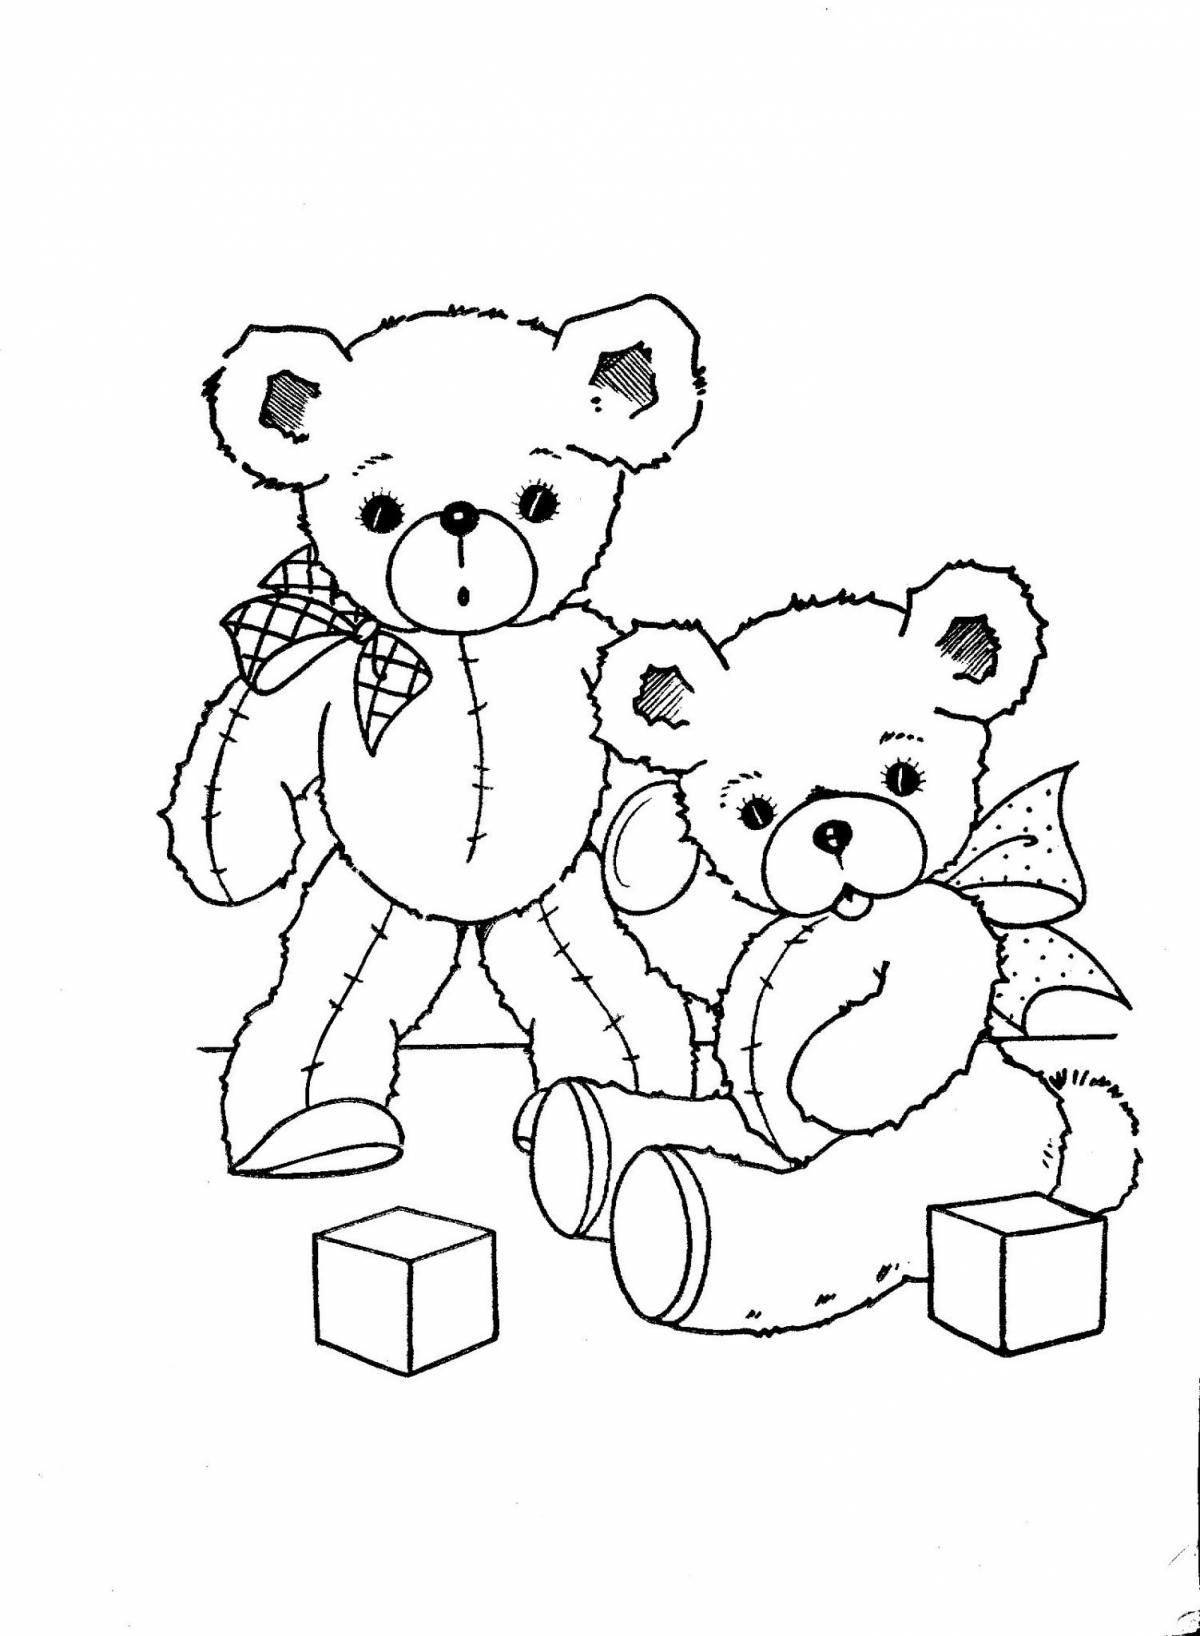 Bright bear coloring by numbers